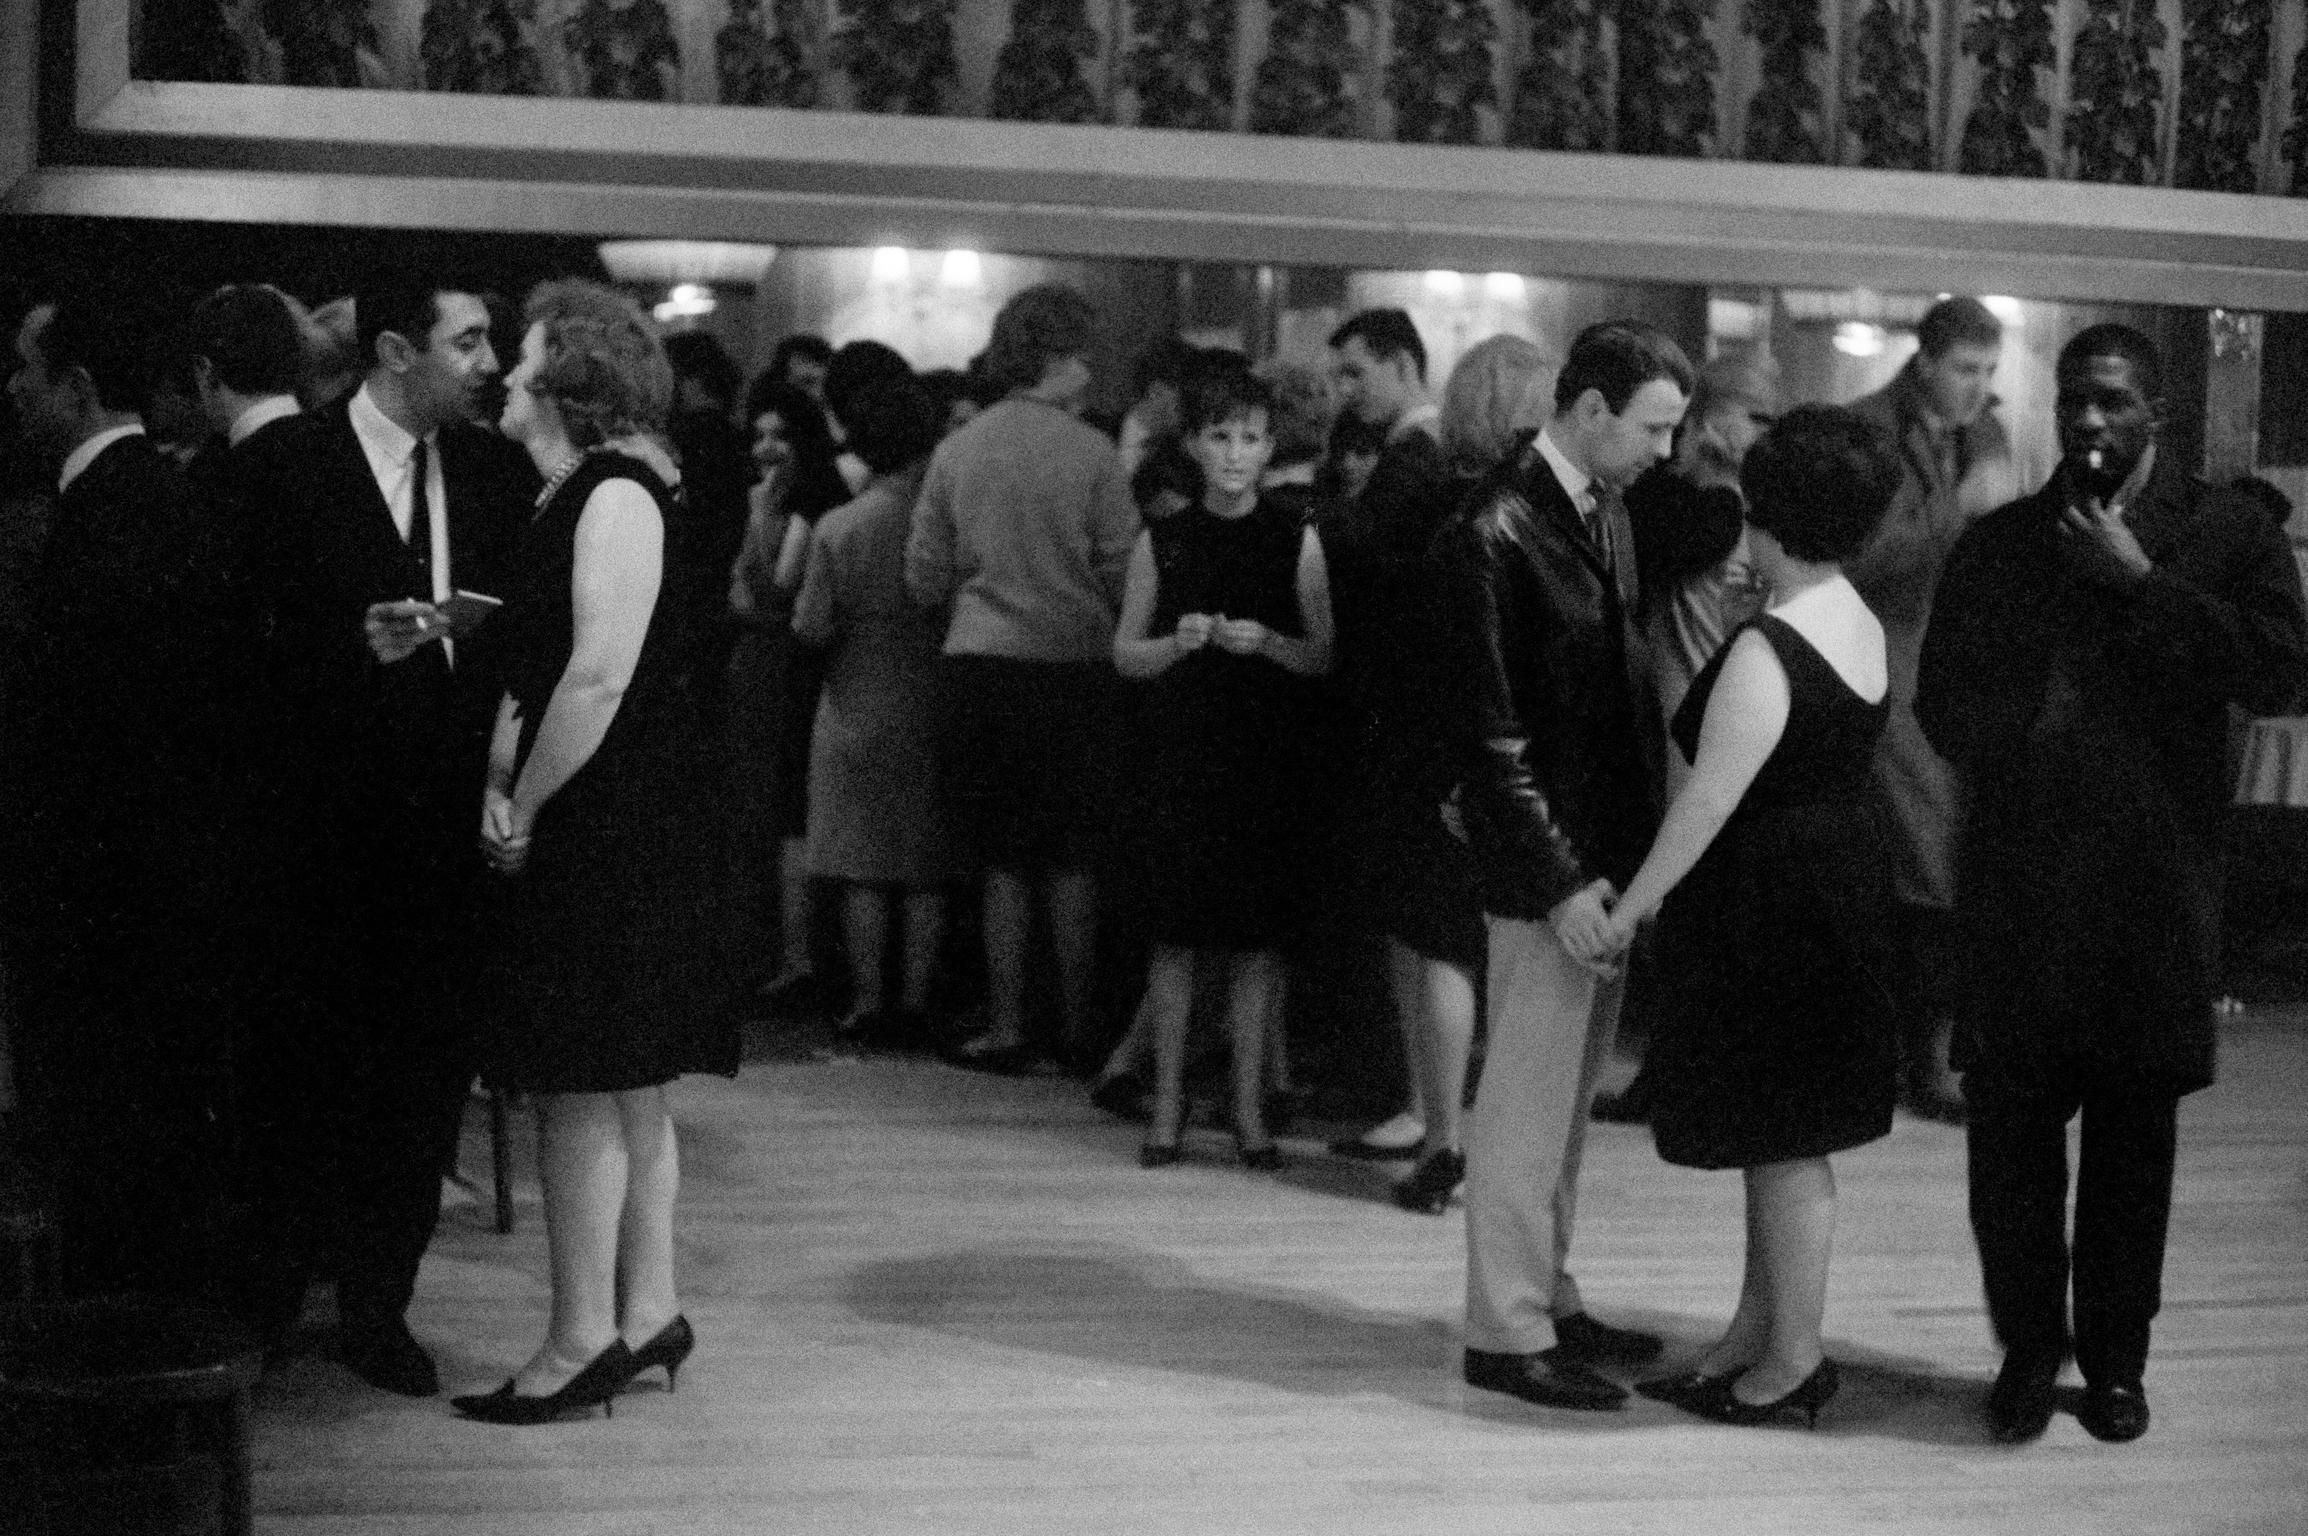 The Hammersmith Palais. The most famous mass dance hall of the 1960s